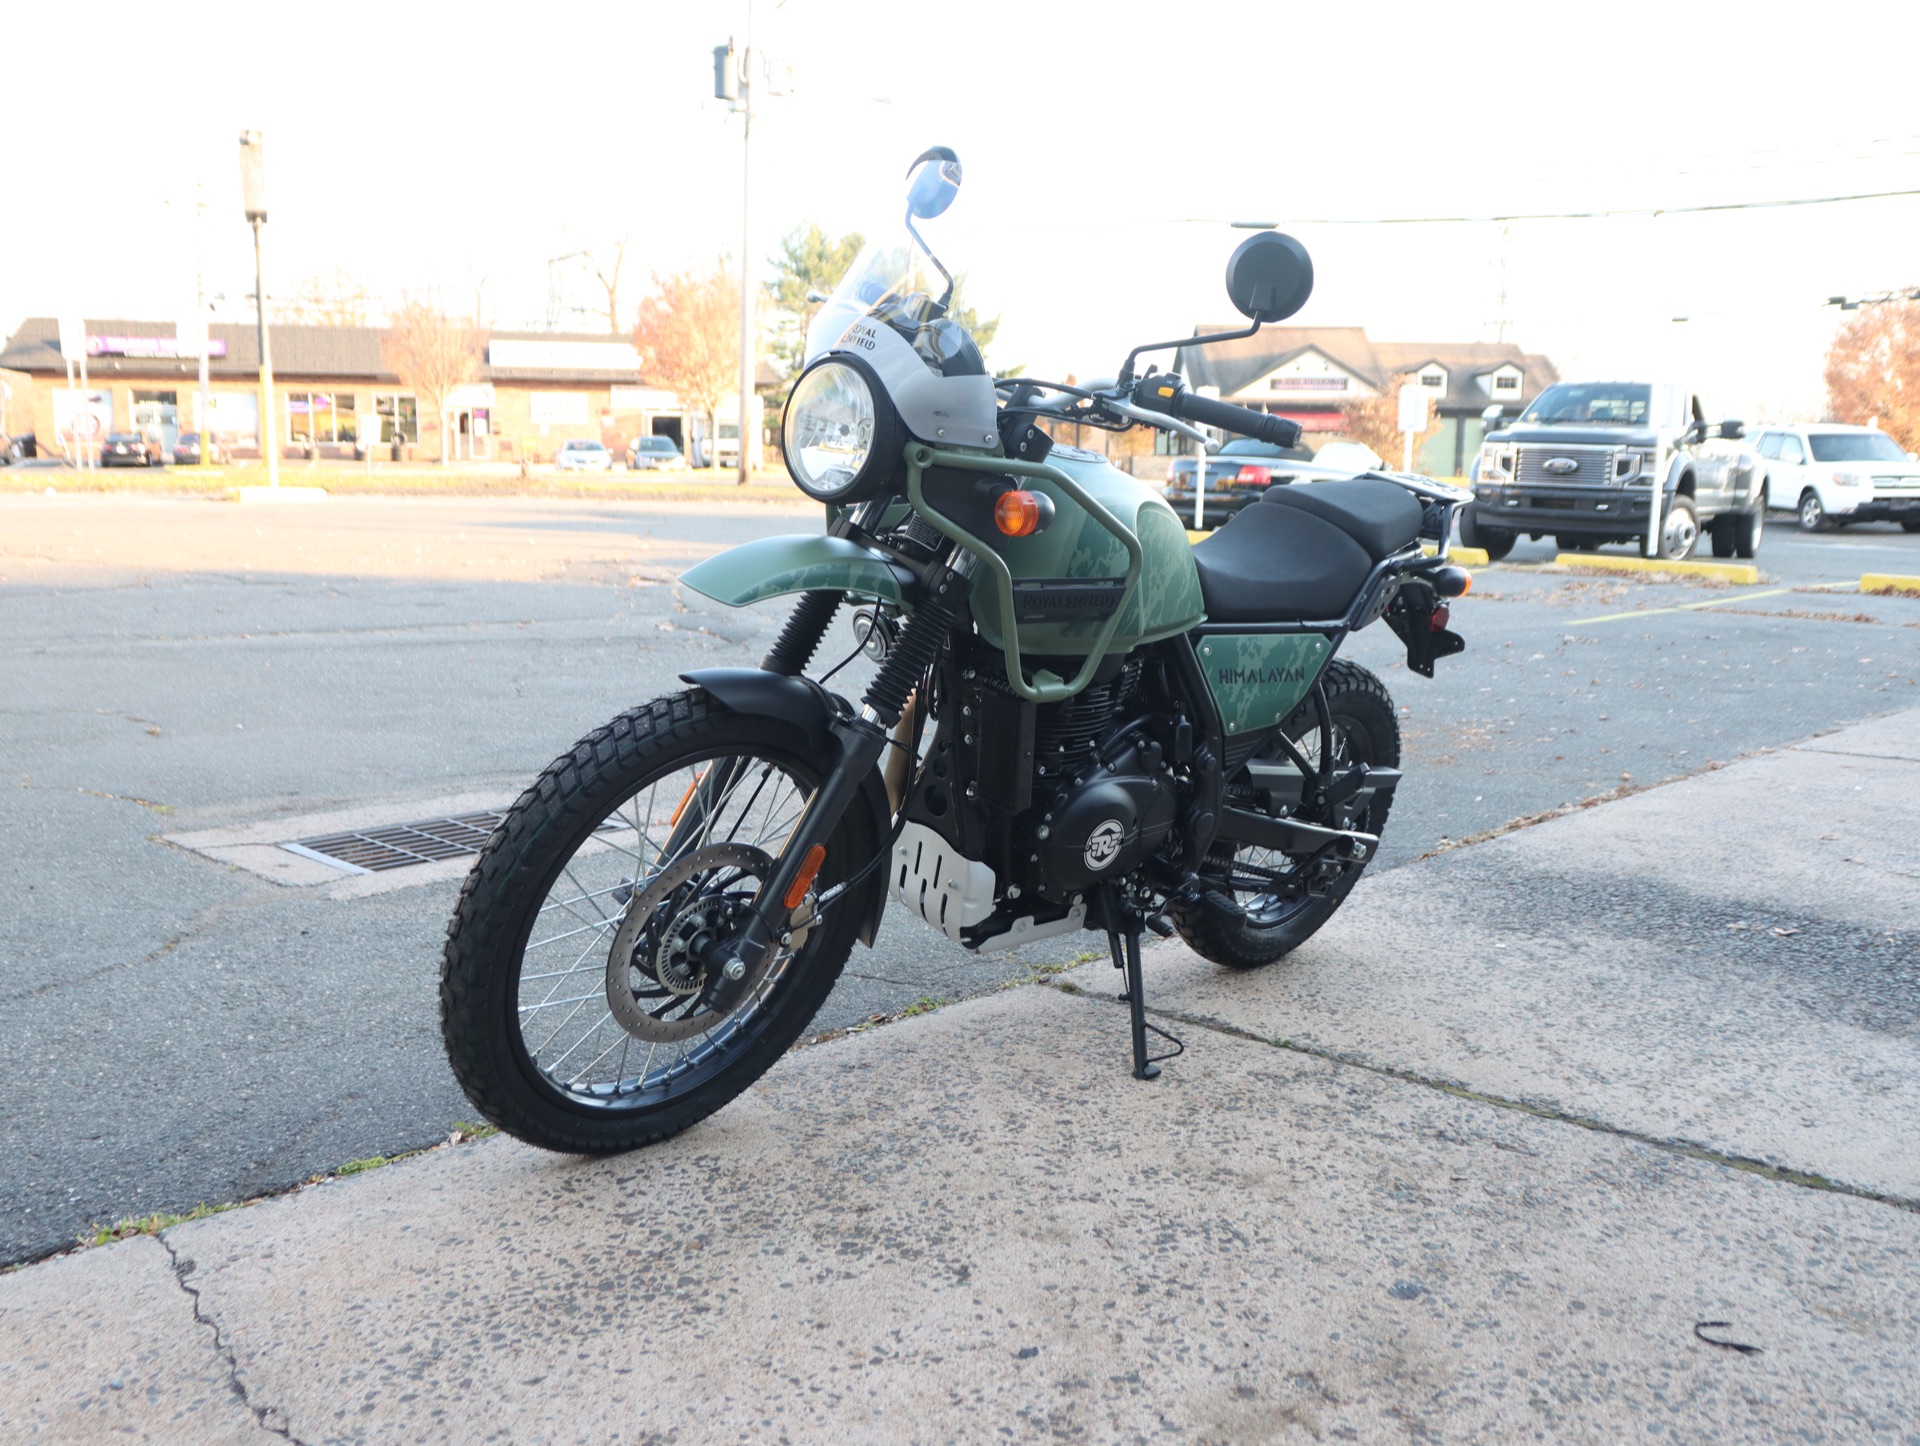 2022 Royal Enfield Himalayan in Enfield, Connecticut - Photo 8